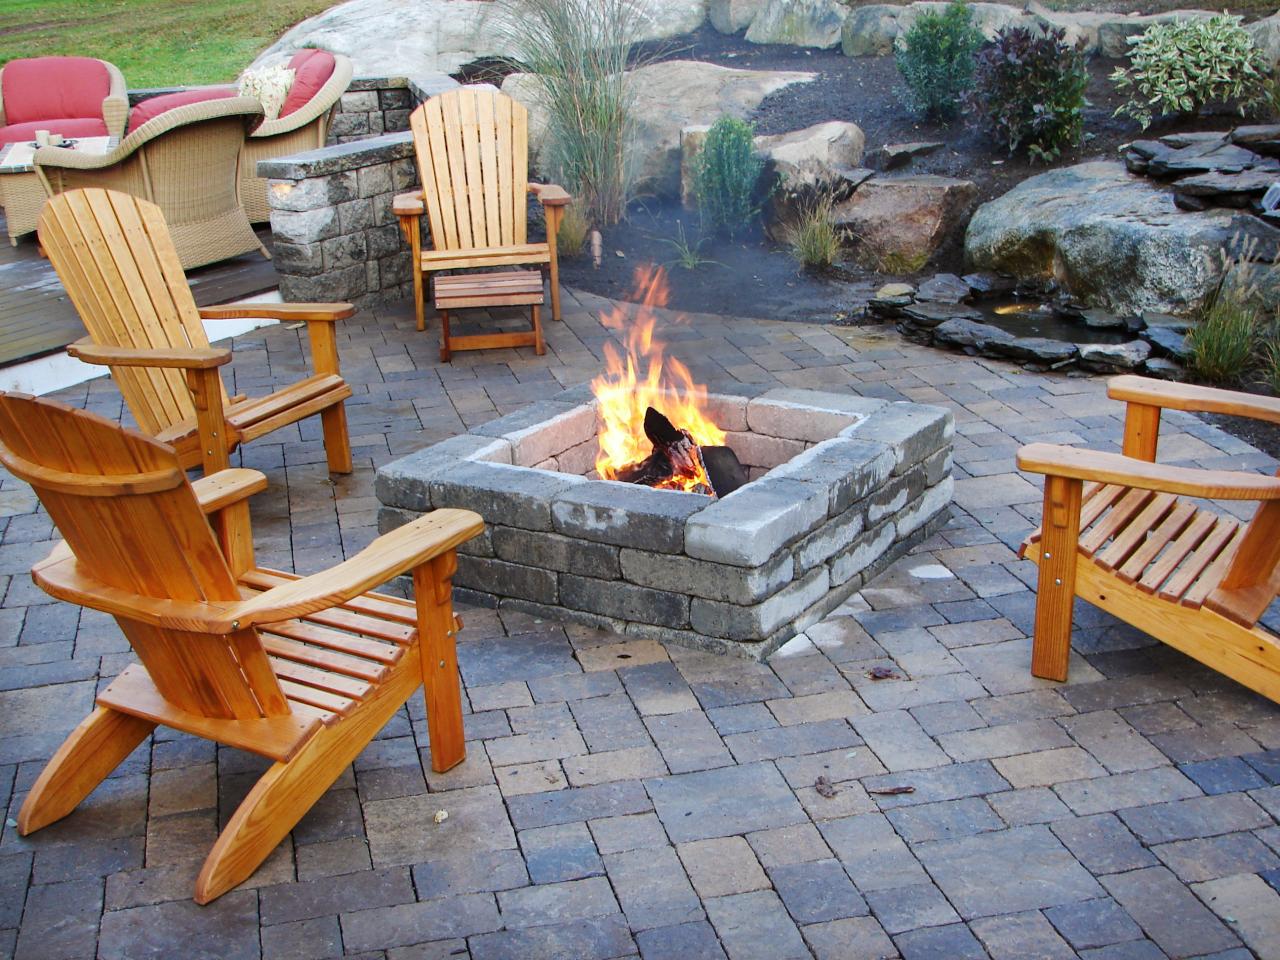 What Is An Outdoor Fireplace, And Why Does it Matter